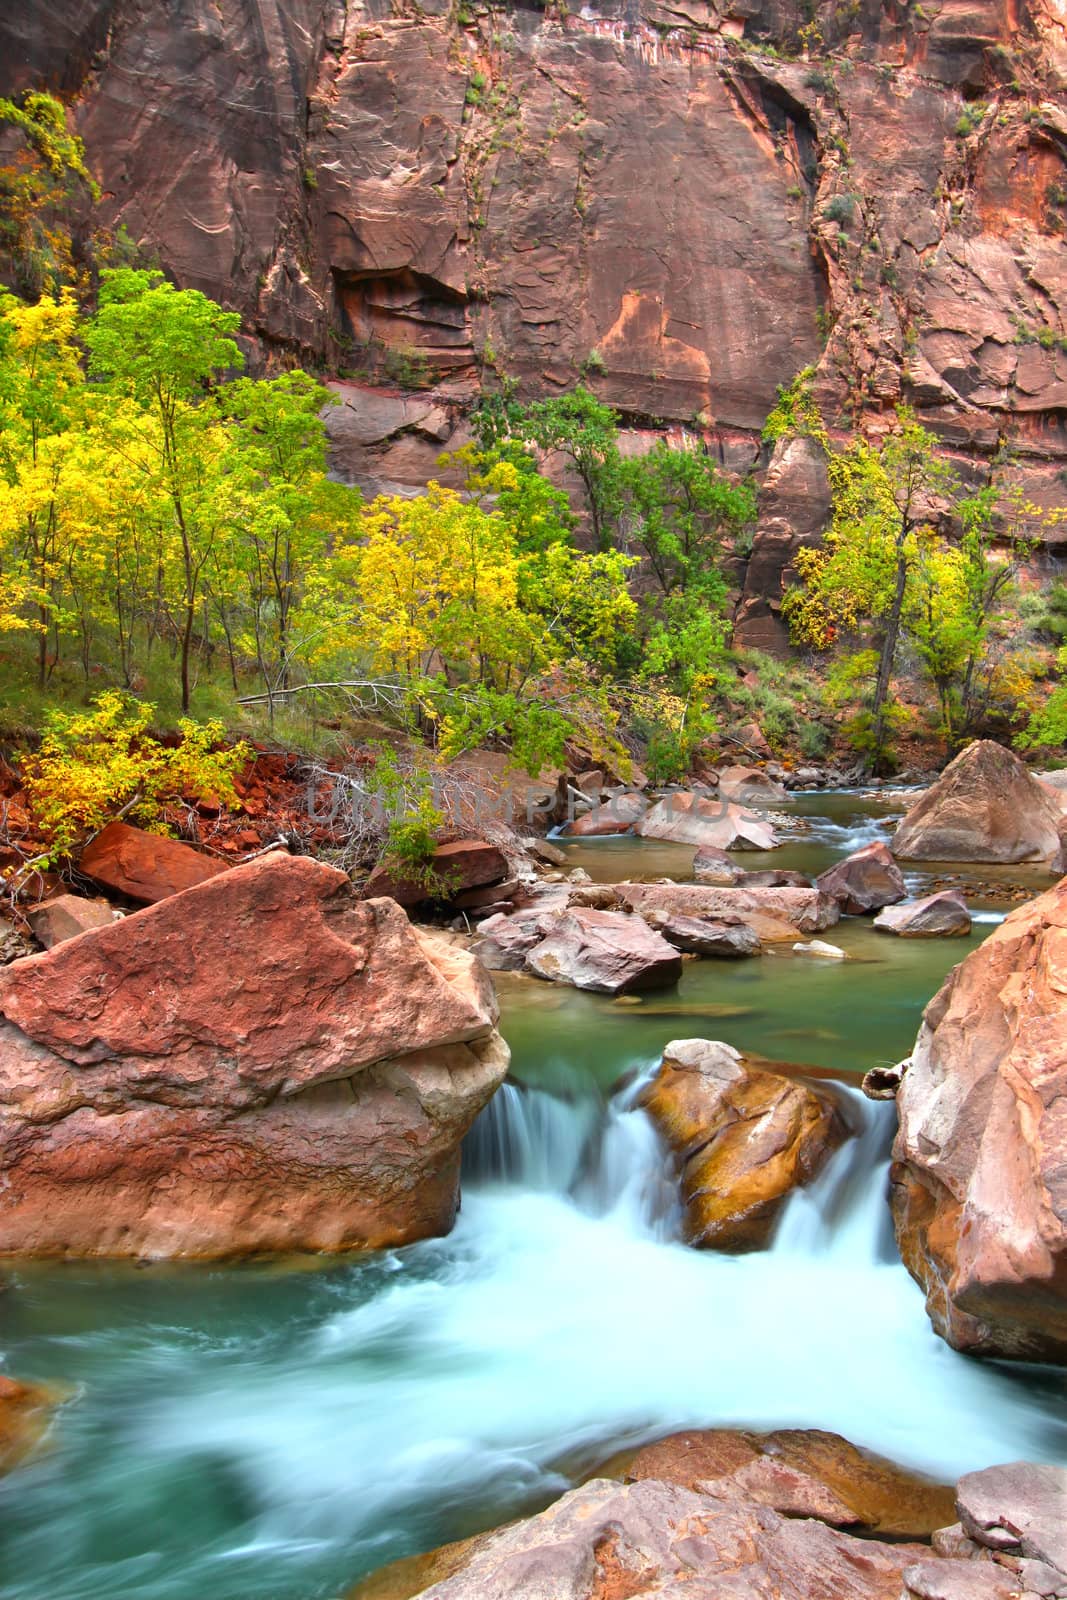 Small Virgin River waterfall through large boulders in Zion Canyon of Utah.